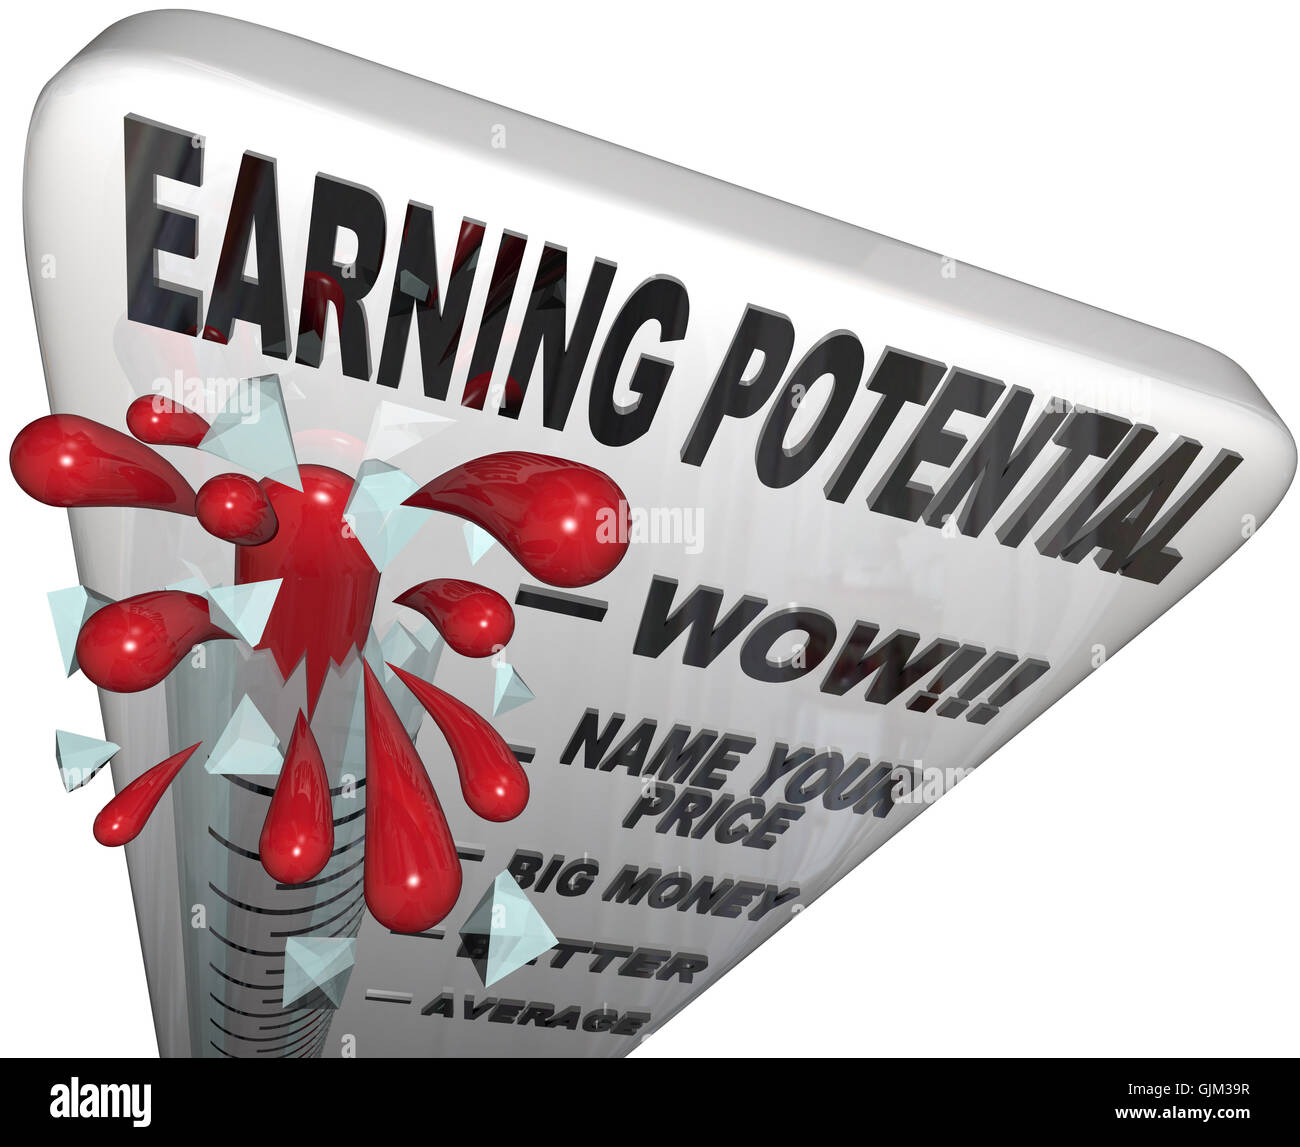 Earning Potential - Thermometer of Income Expectations Stock Photo